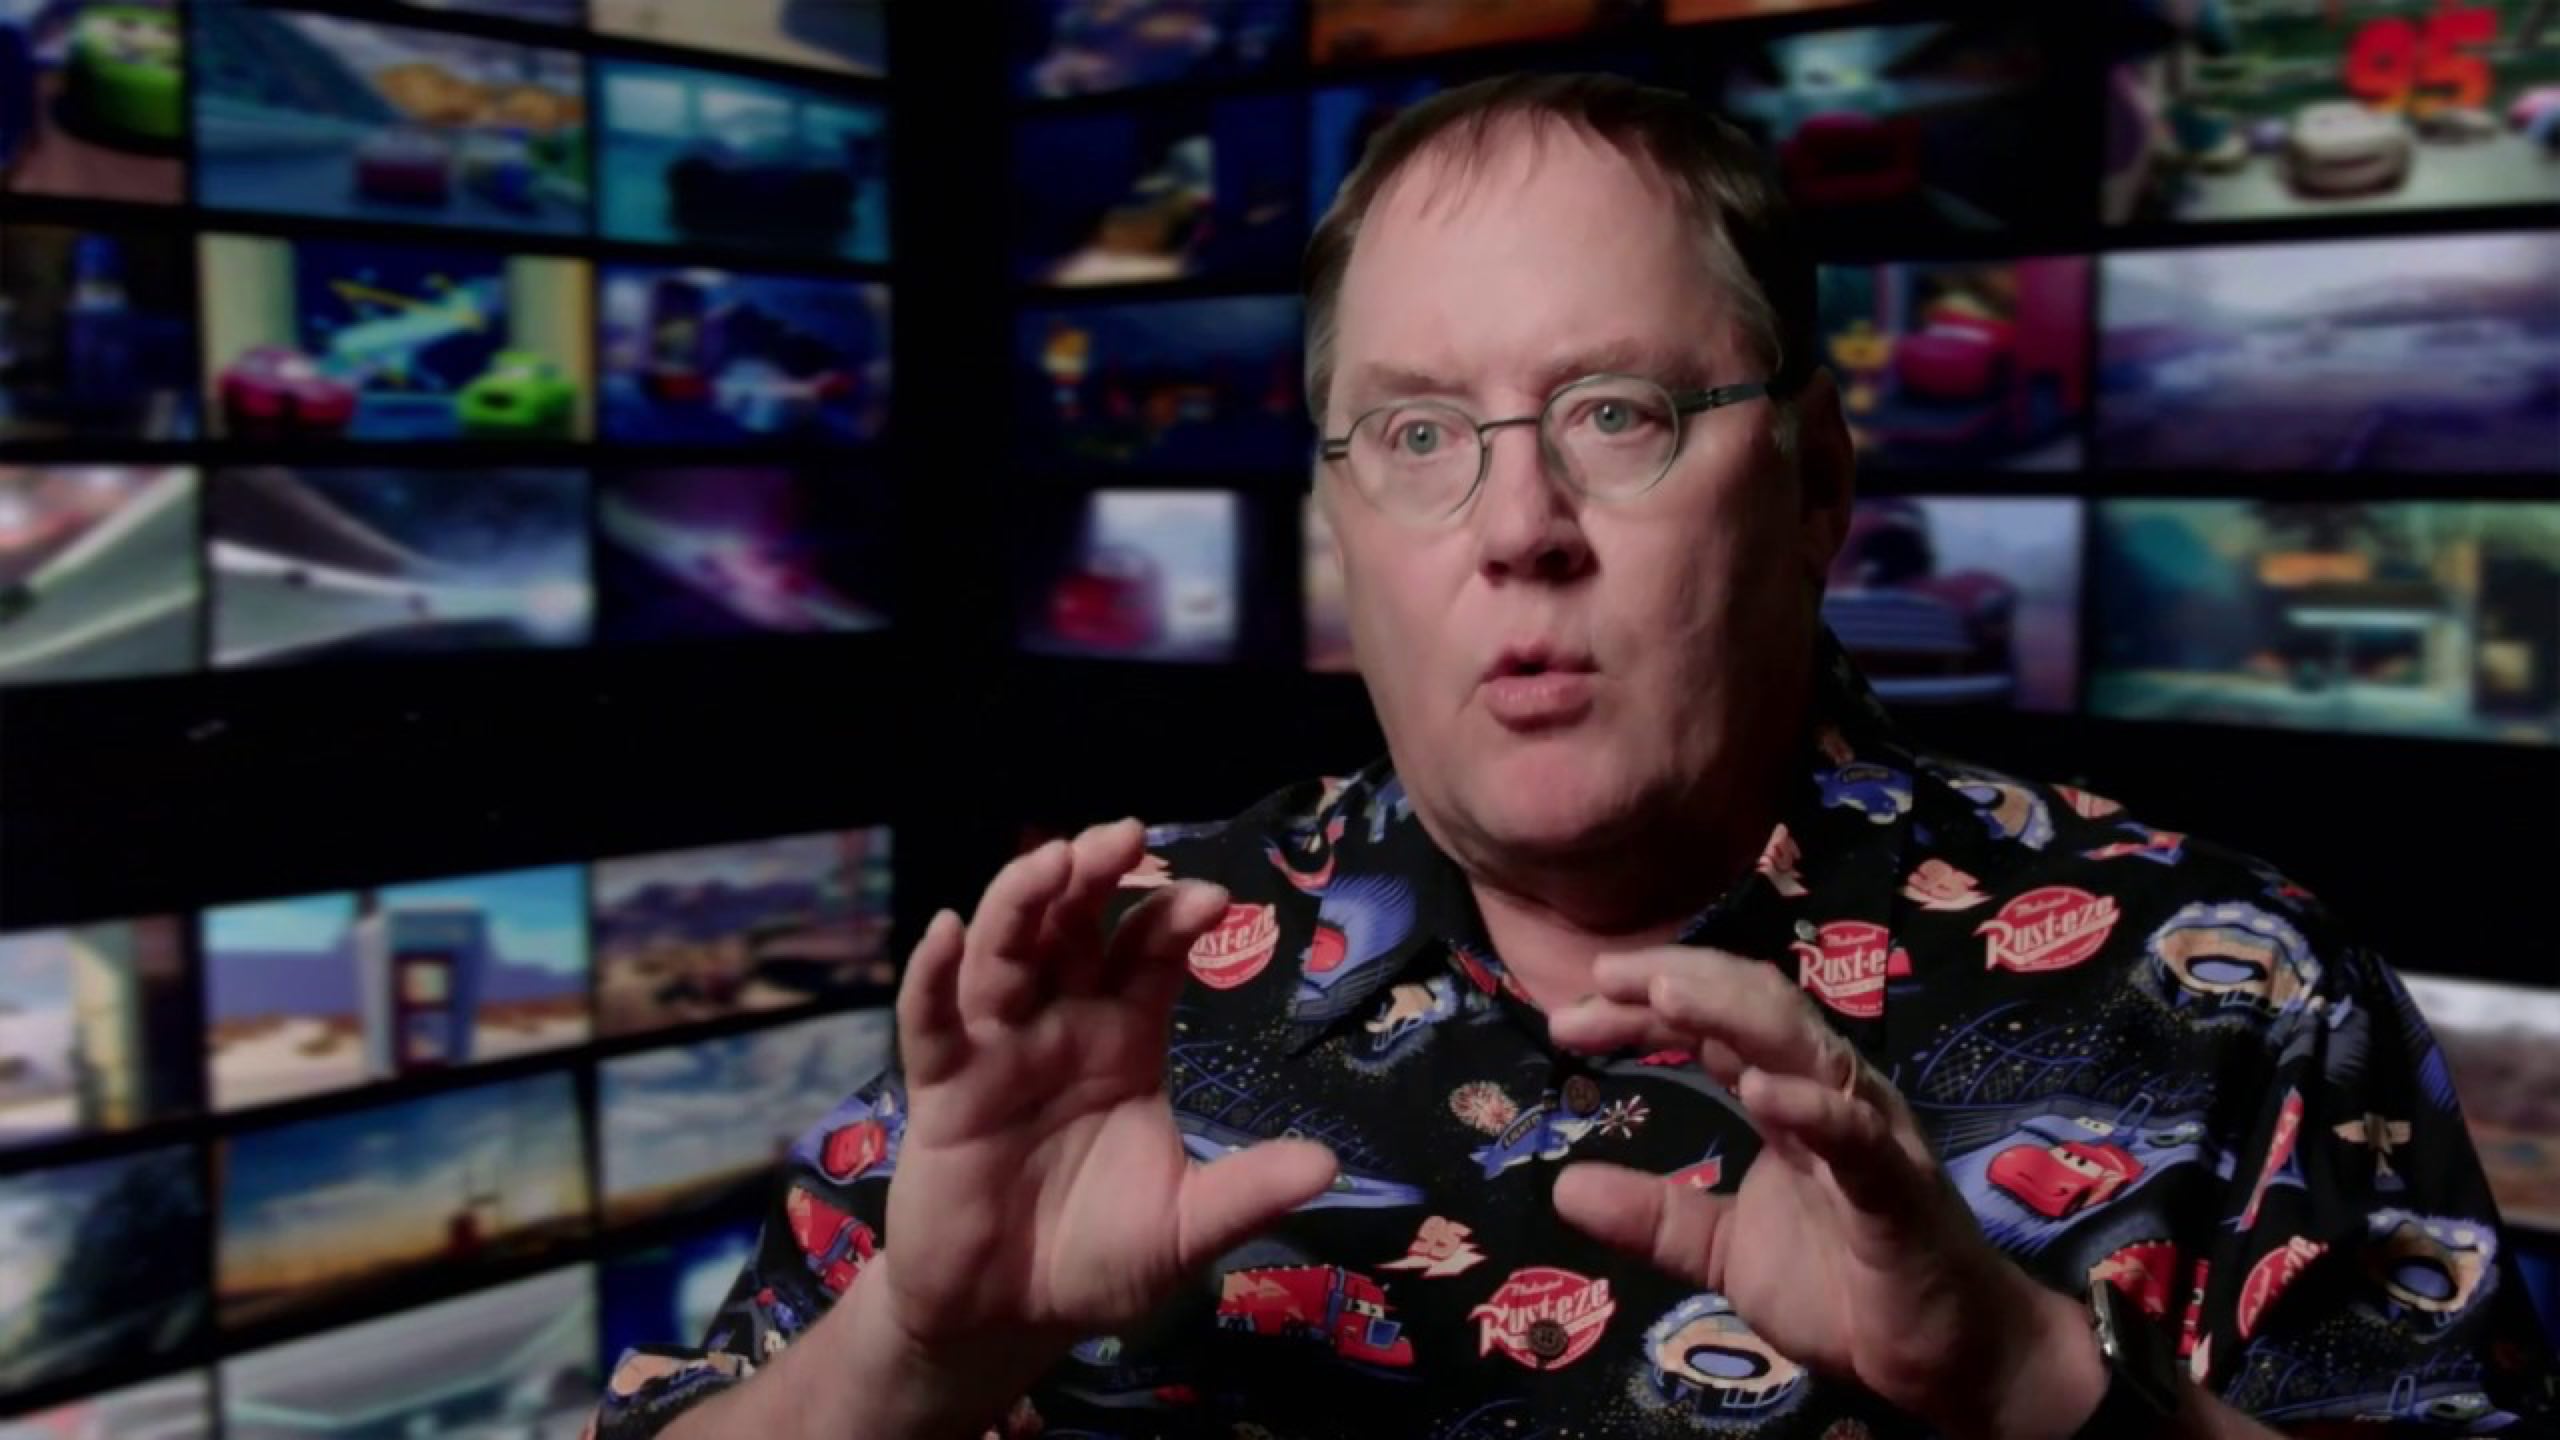 John Lasseter Sexual Harassment Allegations Lead To Leave Of Absence